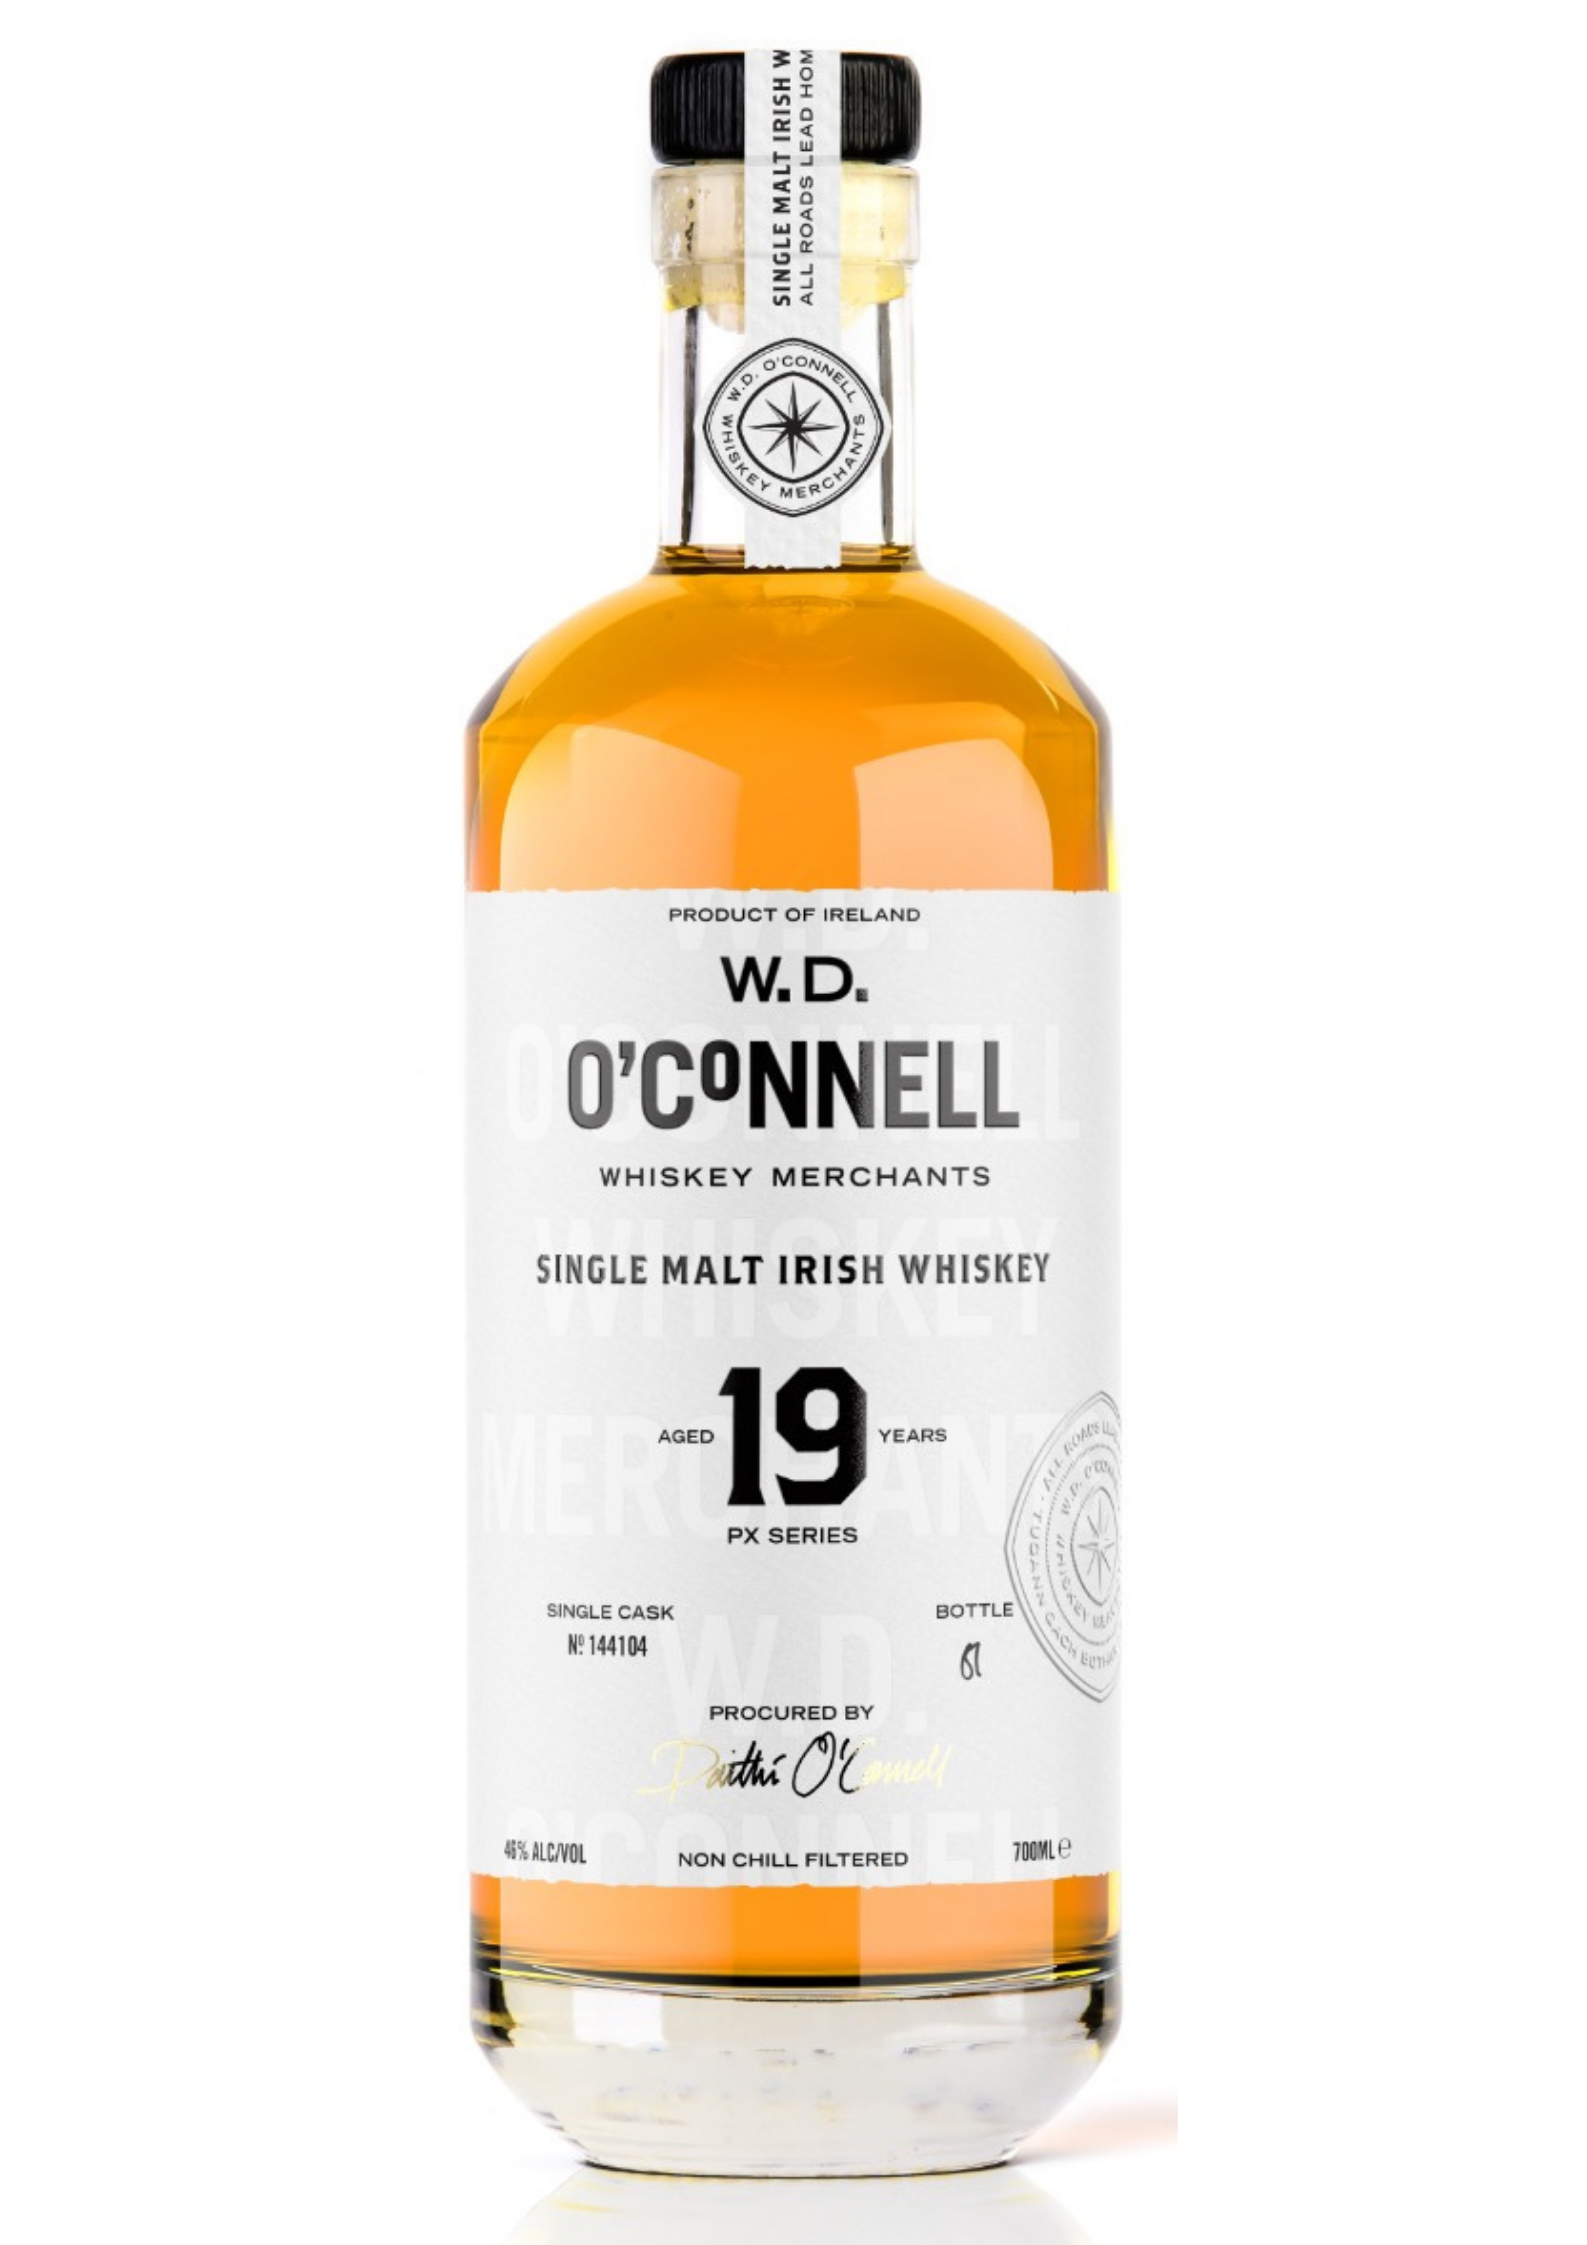 PX Single Cask Irish Whiskey from WD O'Connell Whiskey Merchants